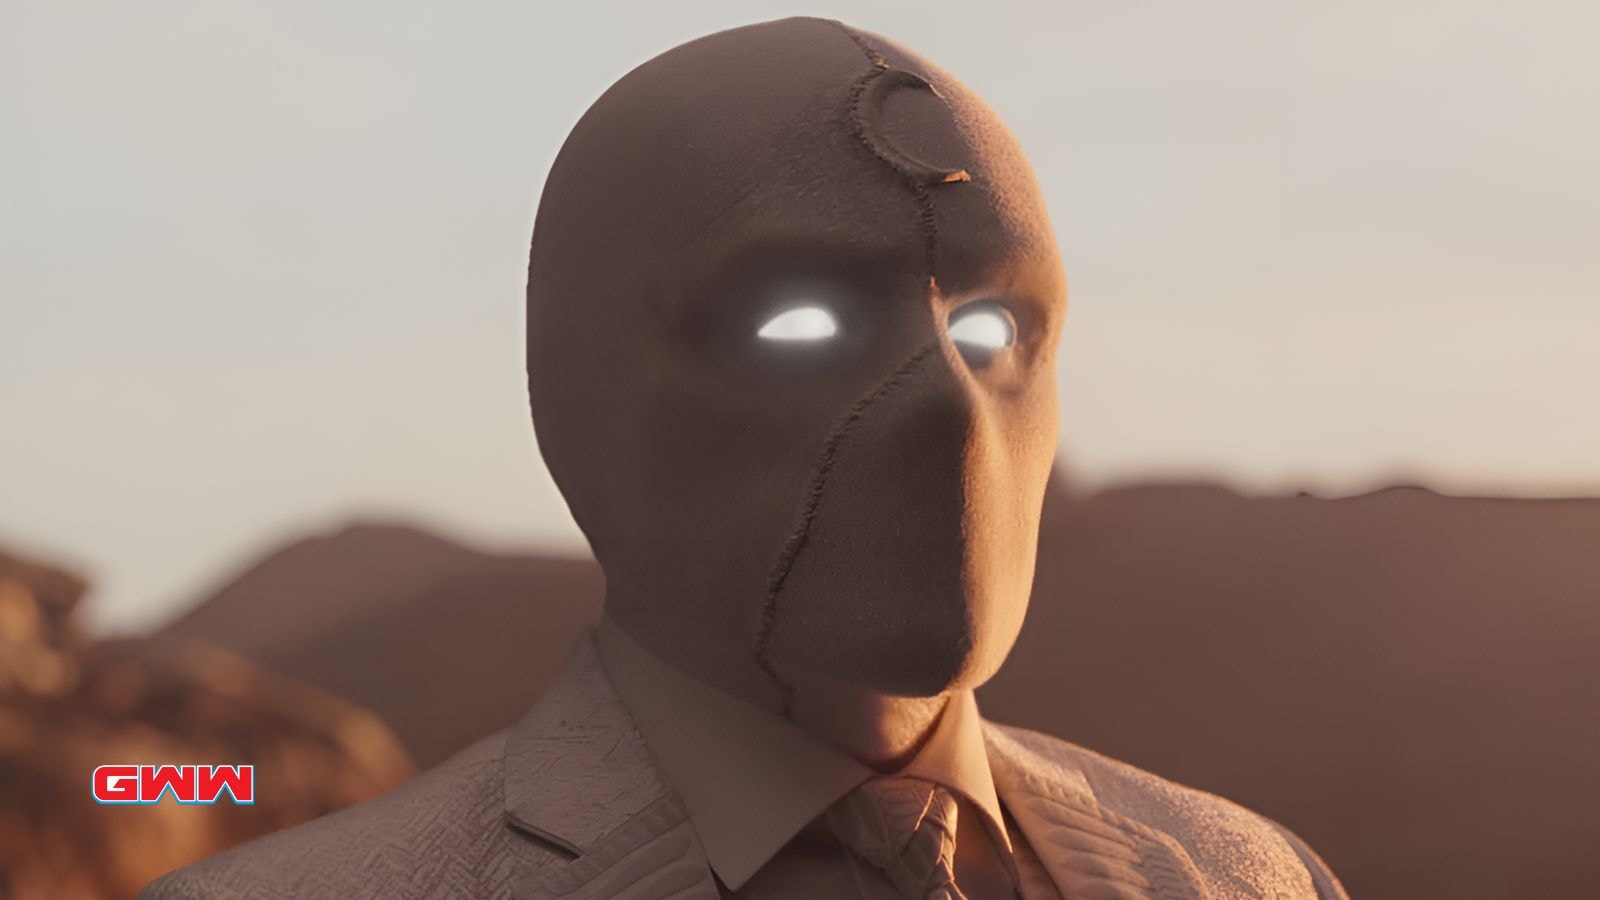 Close-up of Moon Knight with glowing eyes and a desert background.